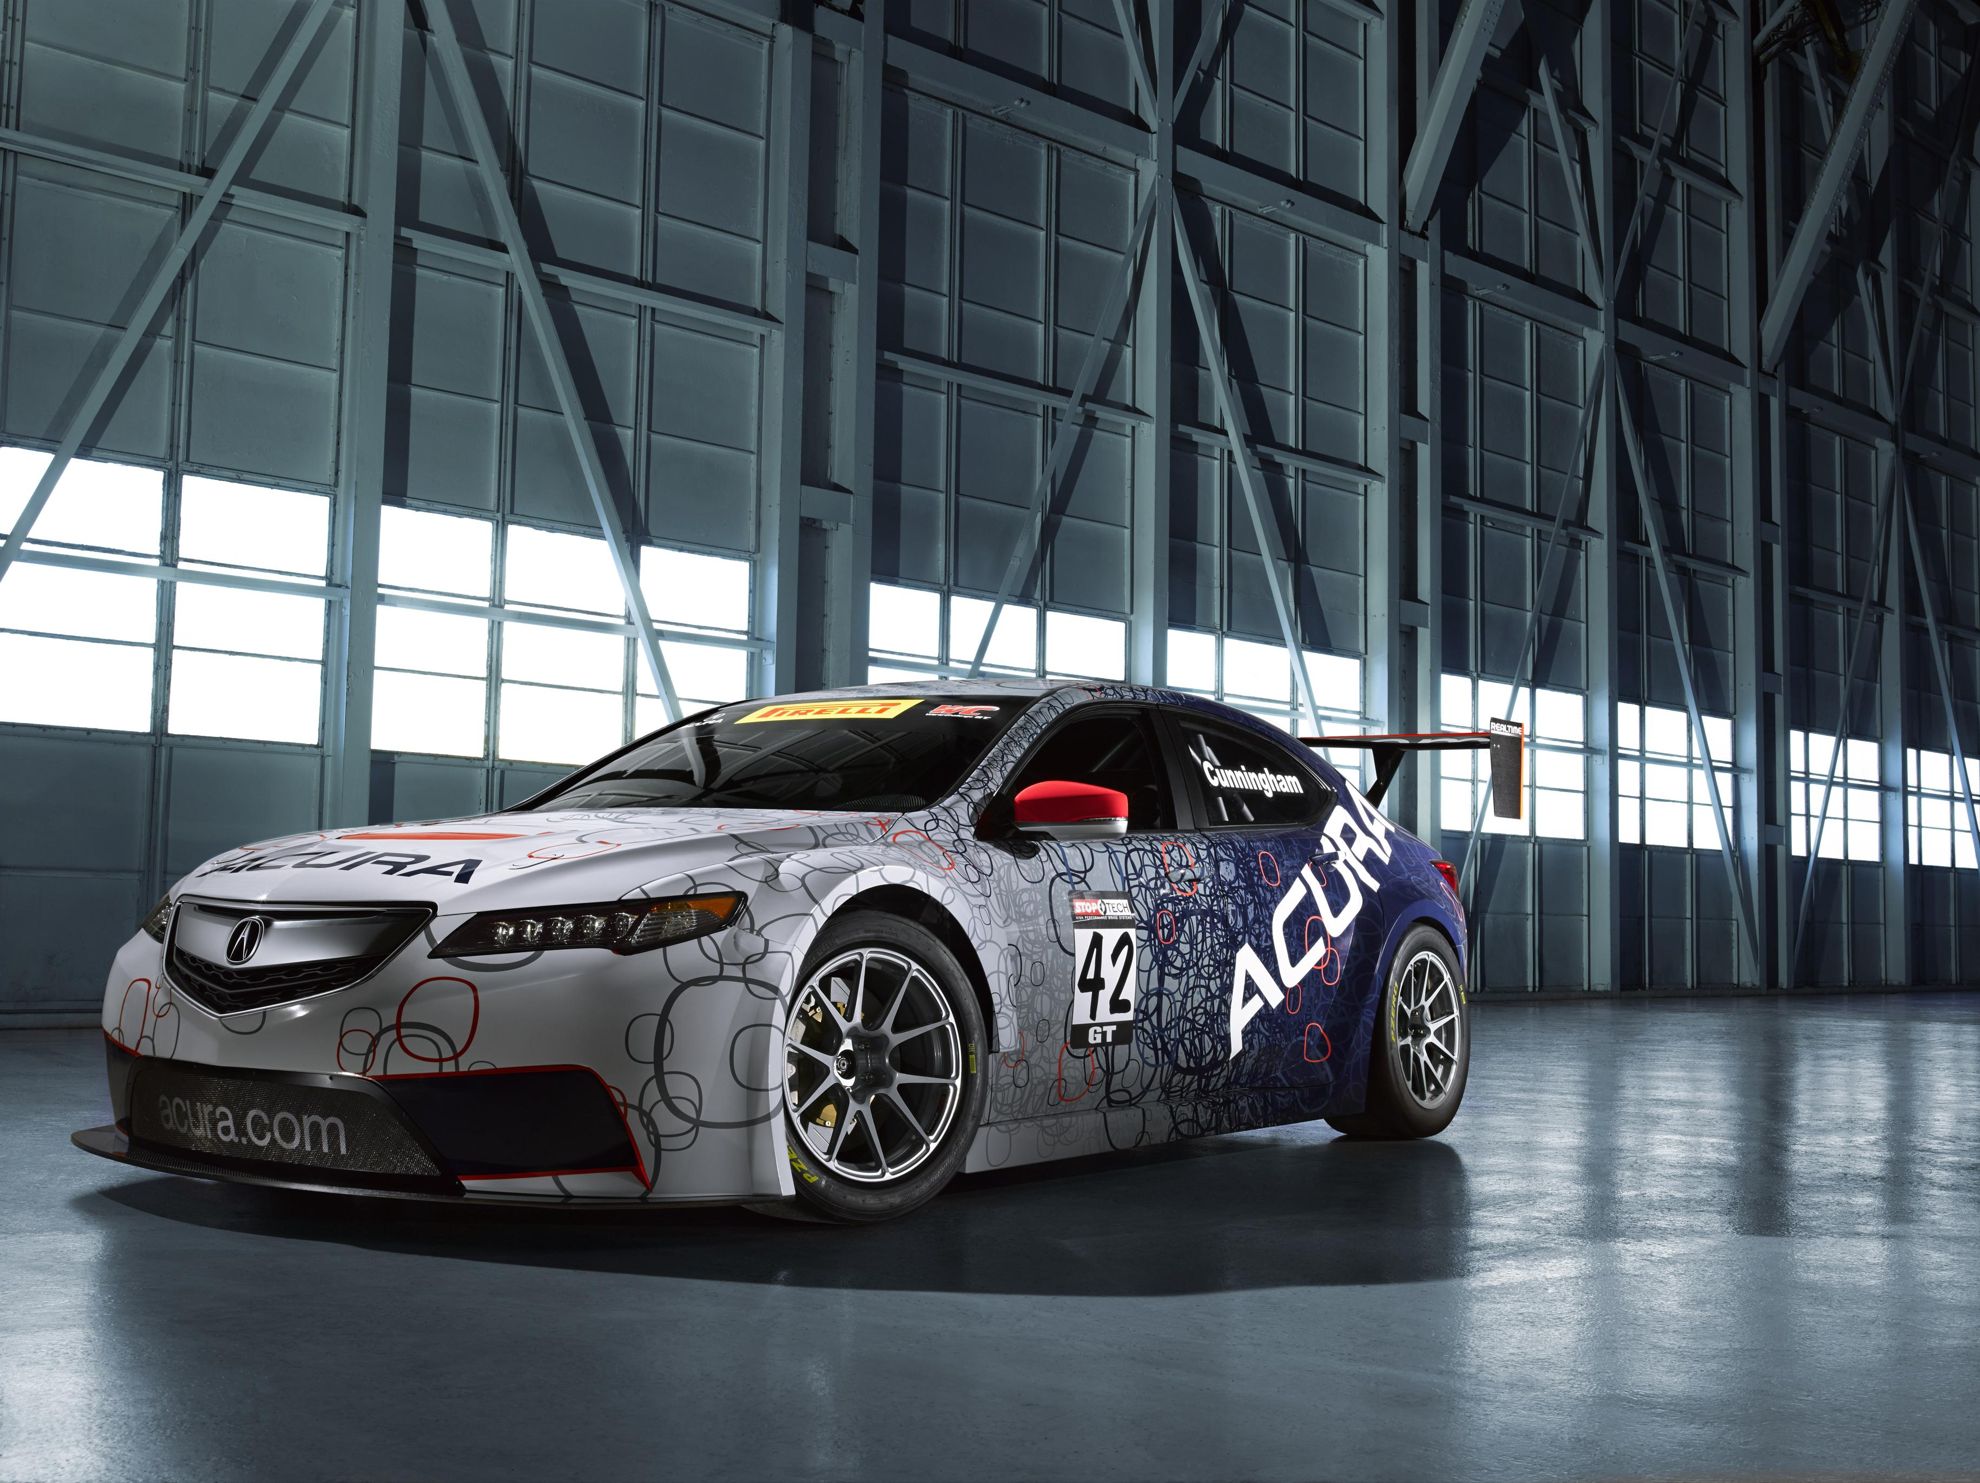 ACURA TLX GT RACE CAR UNVEILED AT NORTH AMERICAN INTERNATIONAL AUTO SHOW 2014